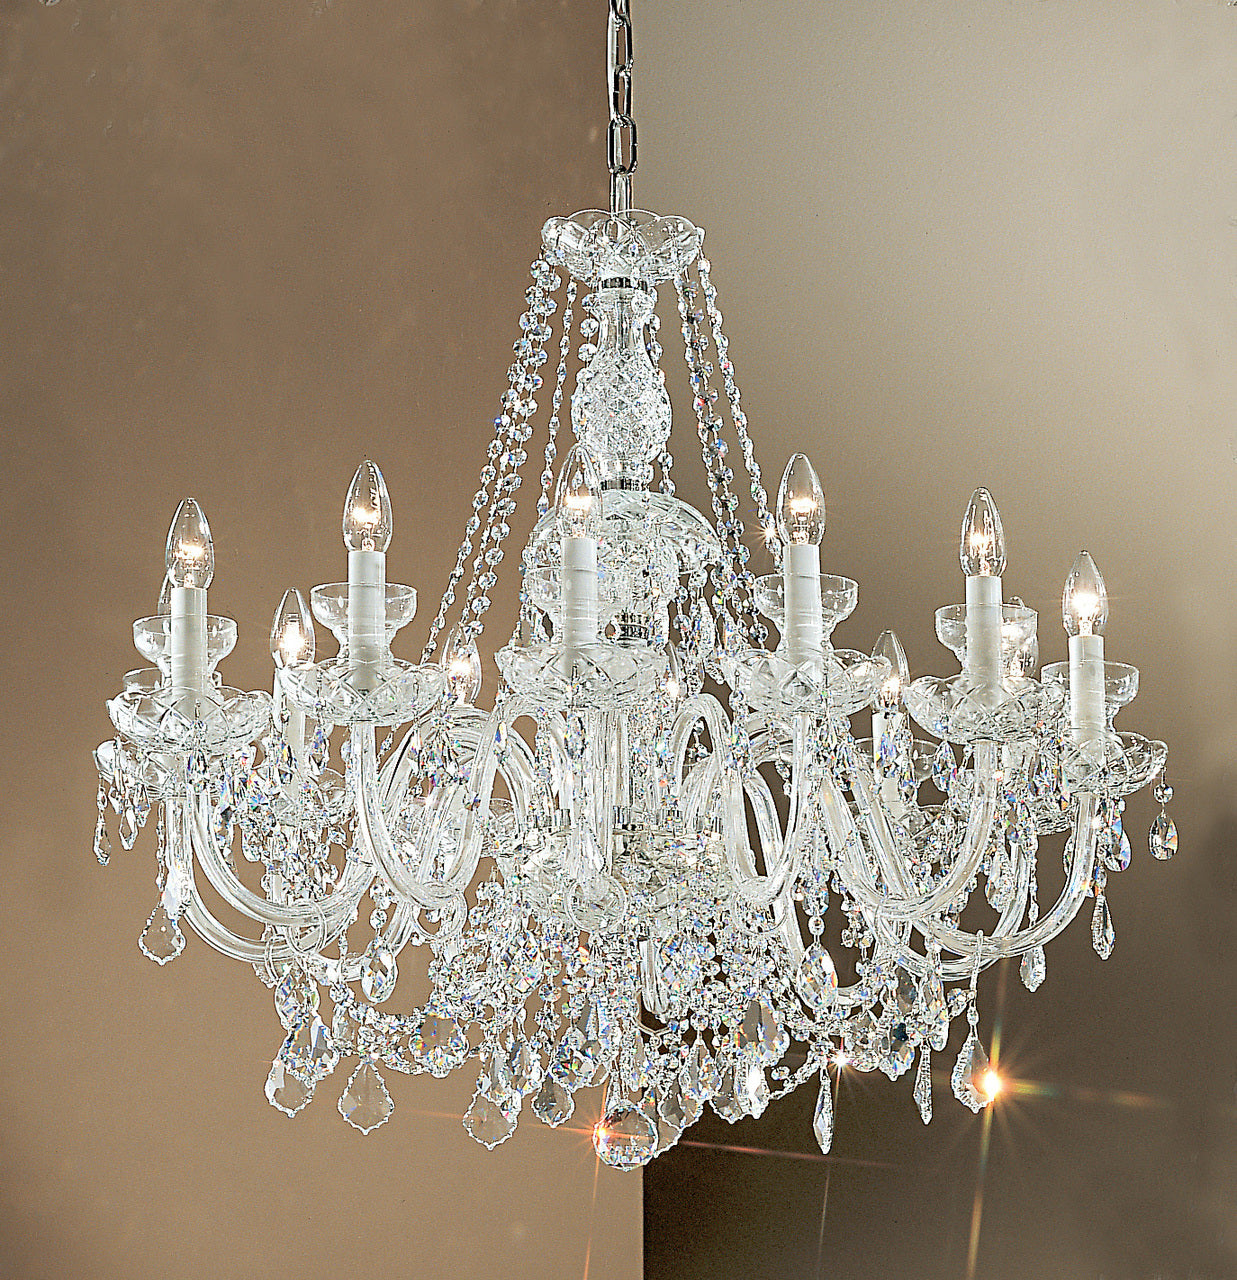 Classic Lighting 8274 CH C Bohemia Crystal/Glass Chandelier in Chrome (Imported from Italy)